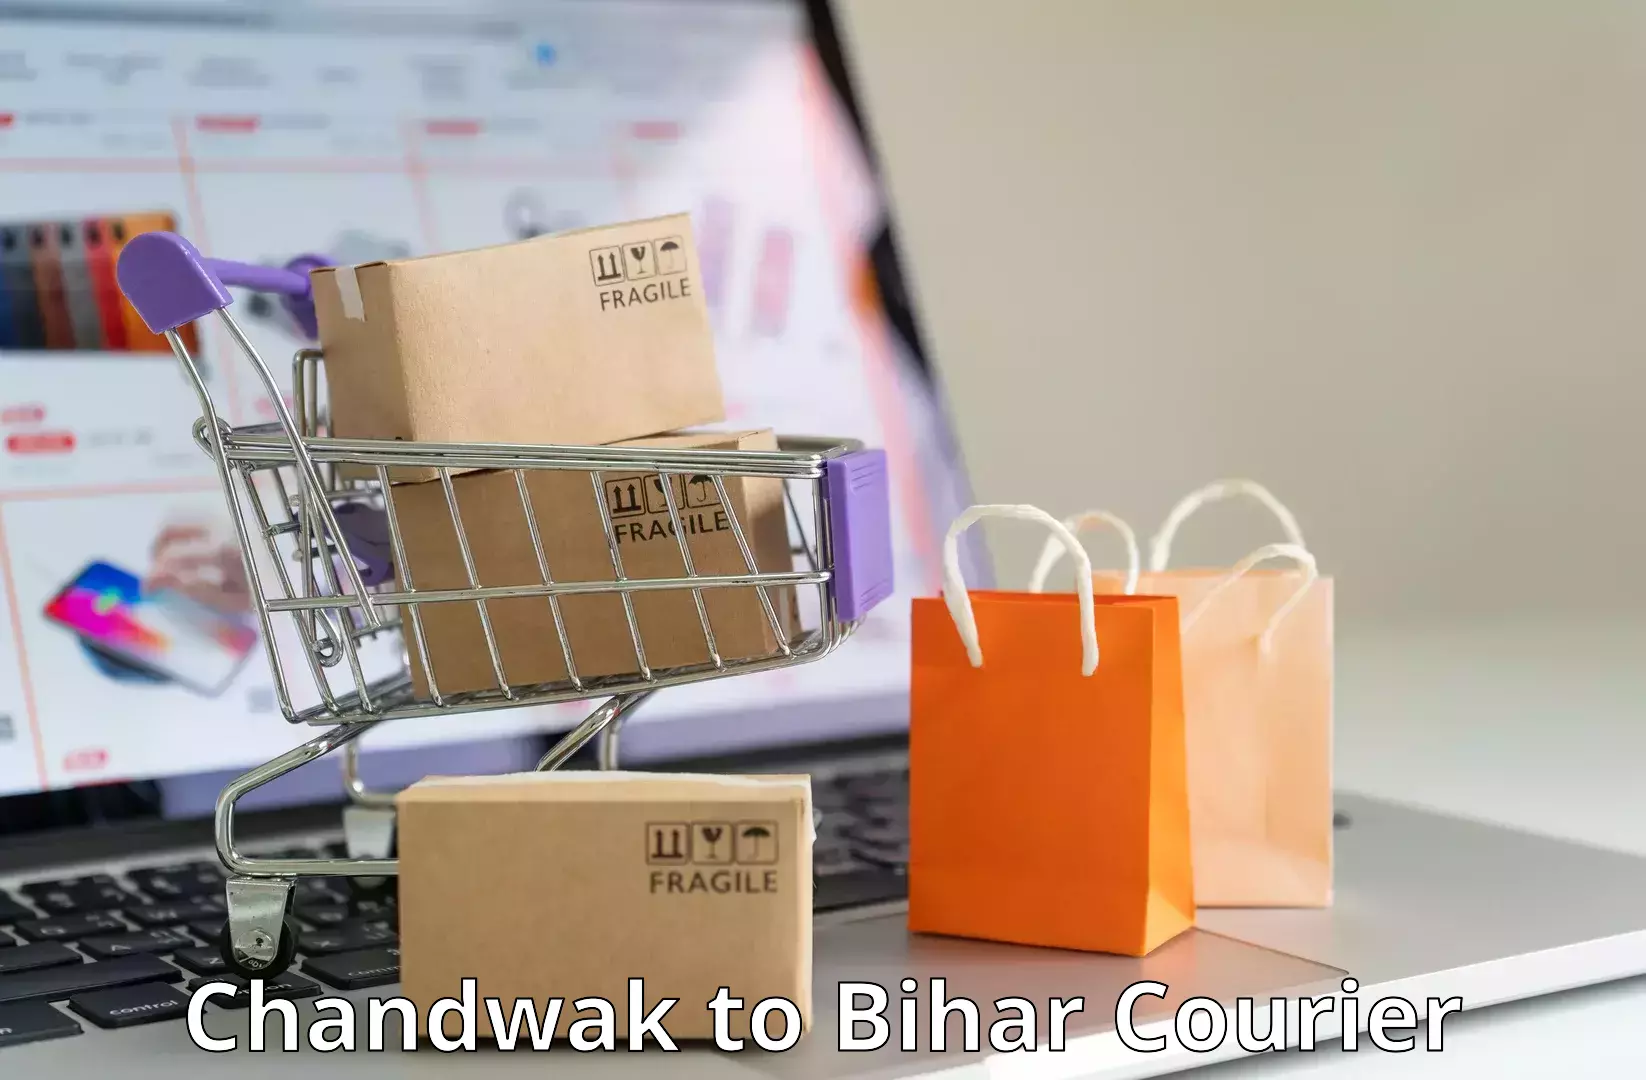 User-friendly delivery service Chandwak to Bhojpur